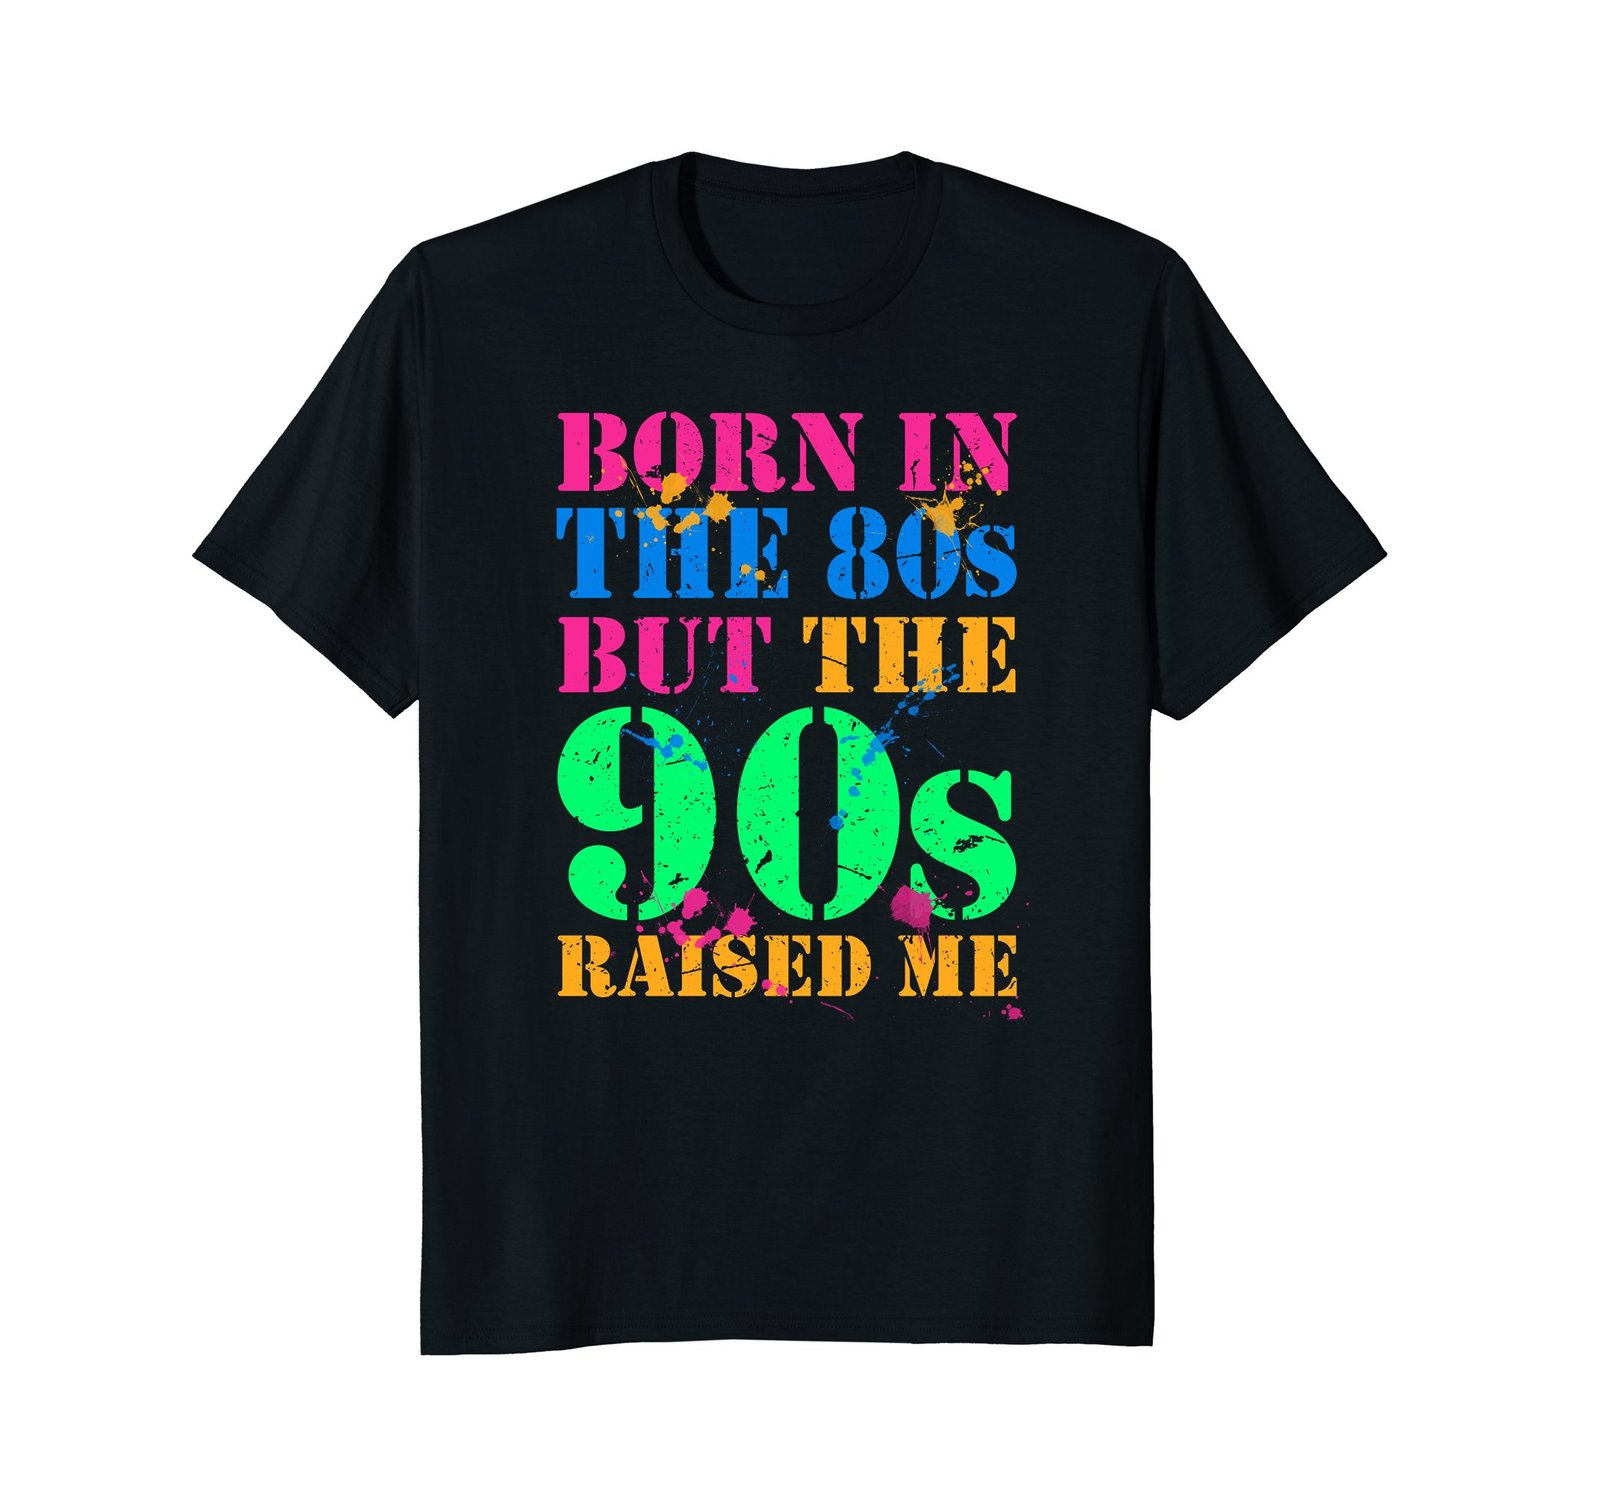 Funny Shirts - Born In The 80s But 90s Raised Me - 80s 90s Kids T-Shirt ...